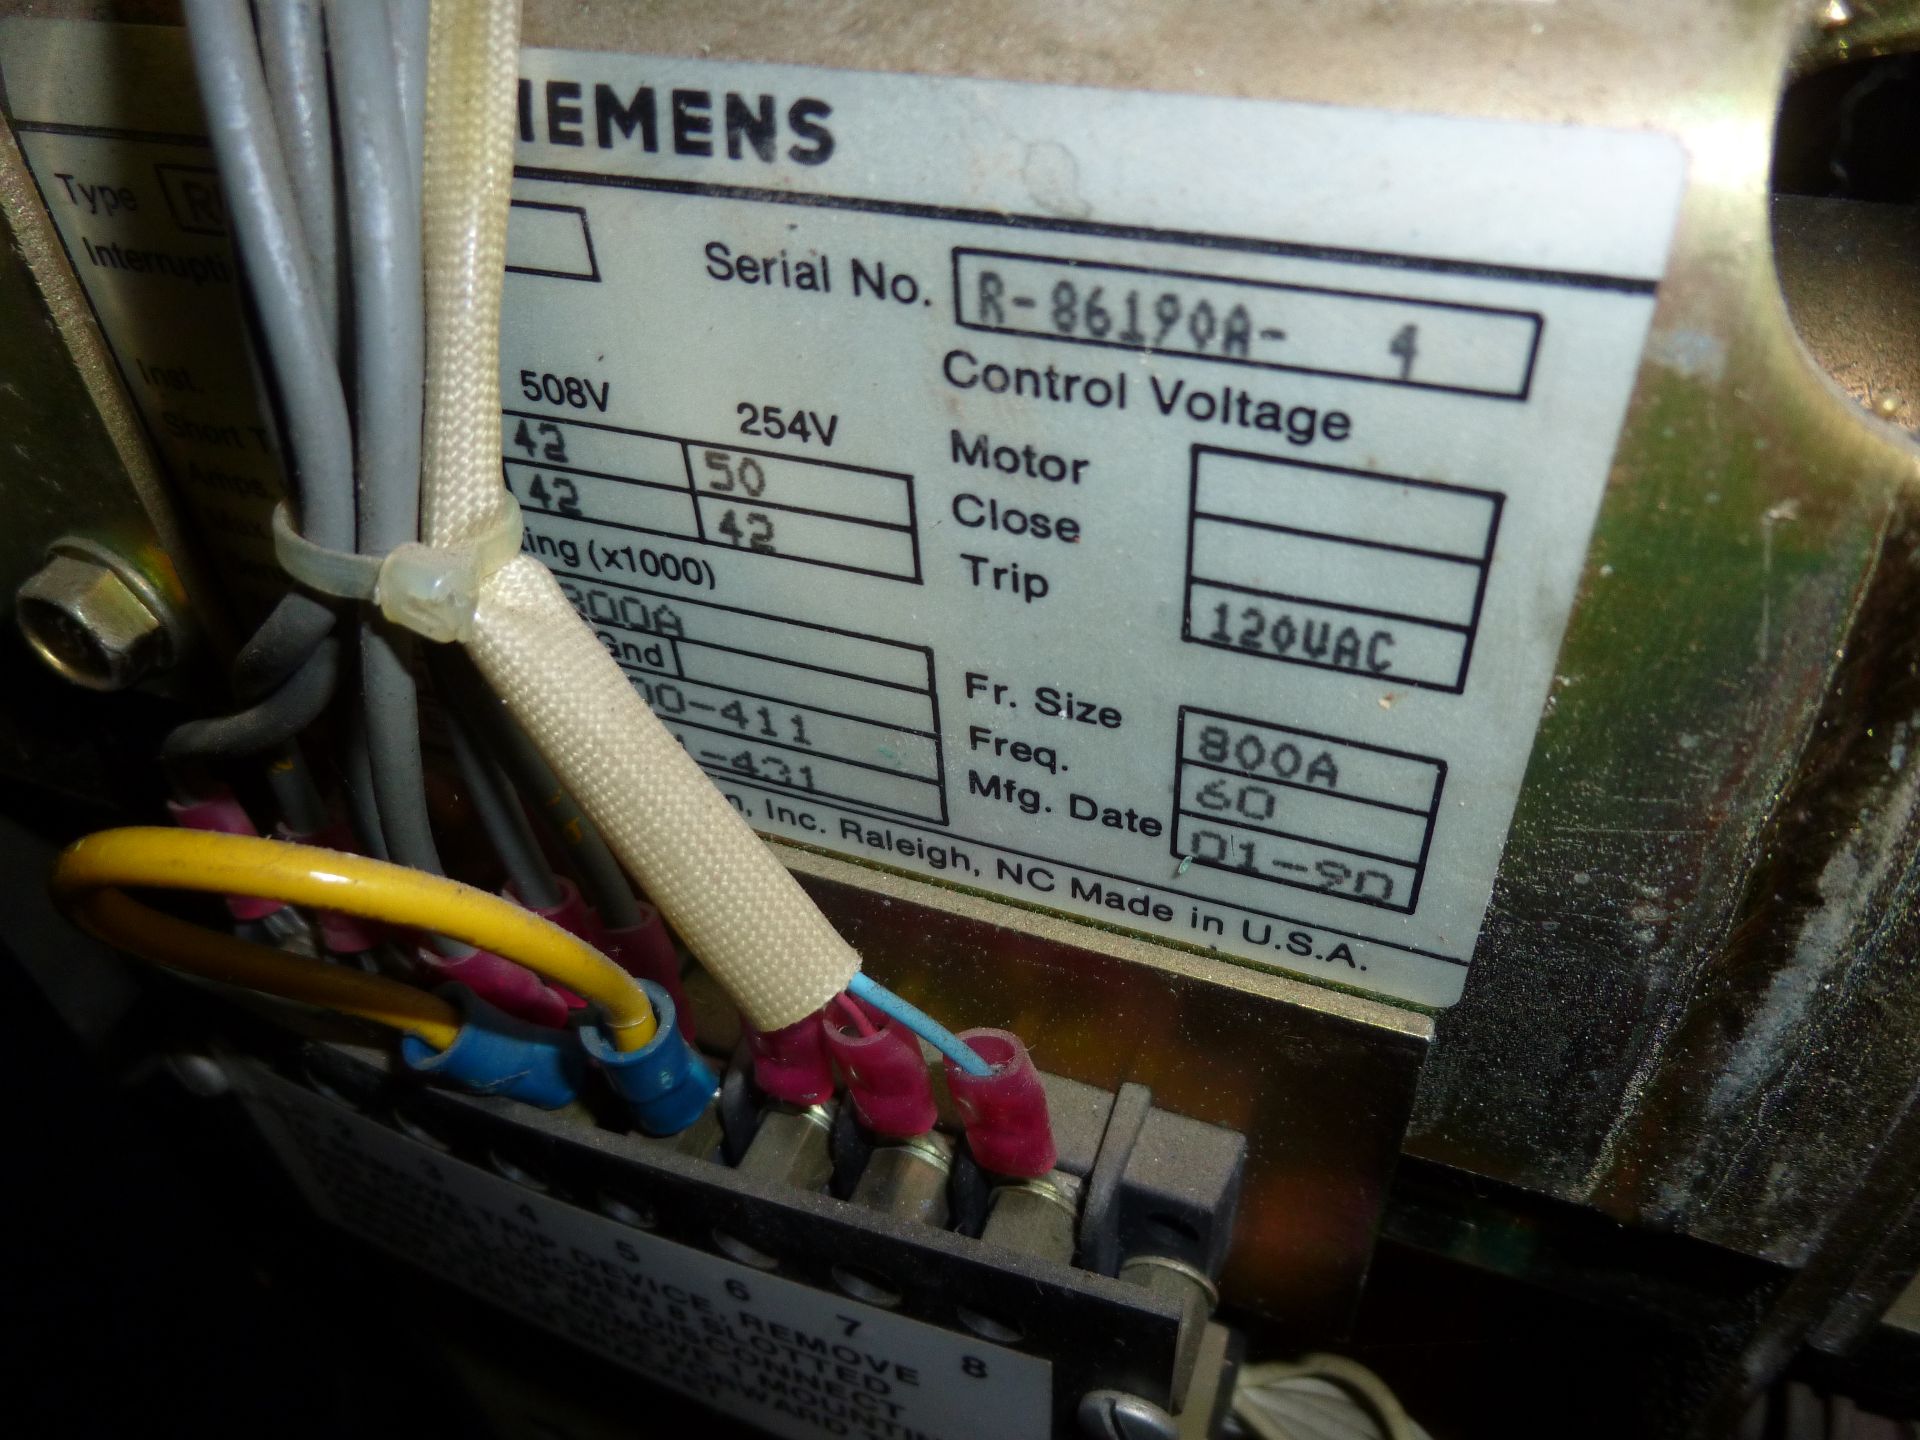 Siemens RLX-800 circuit breaker, 635v max, 800amp frame size with static trip III monitor - Image 5 of 6